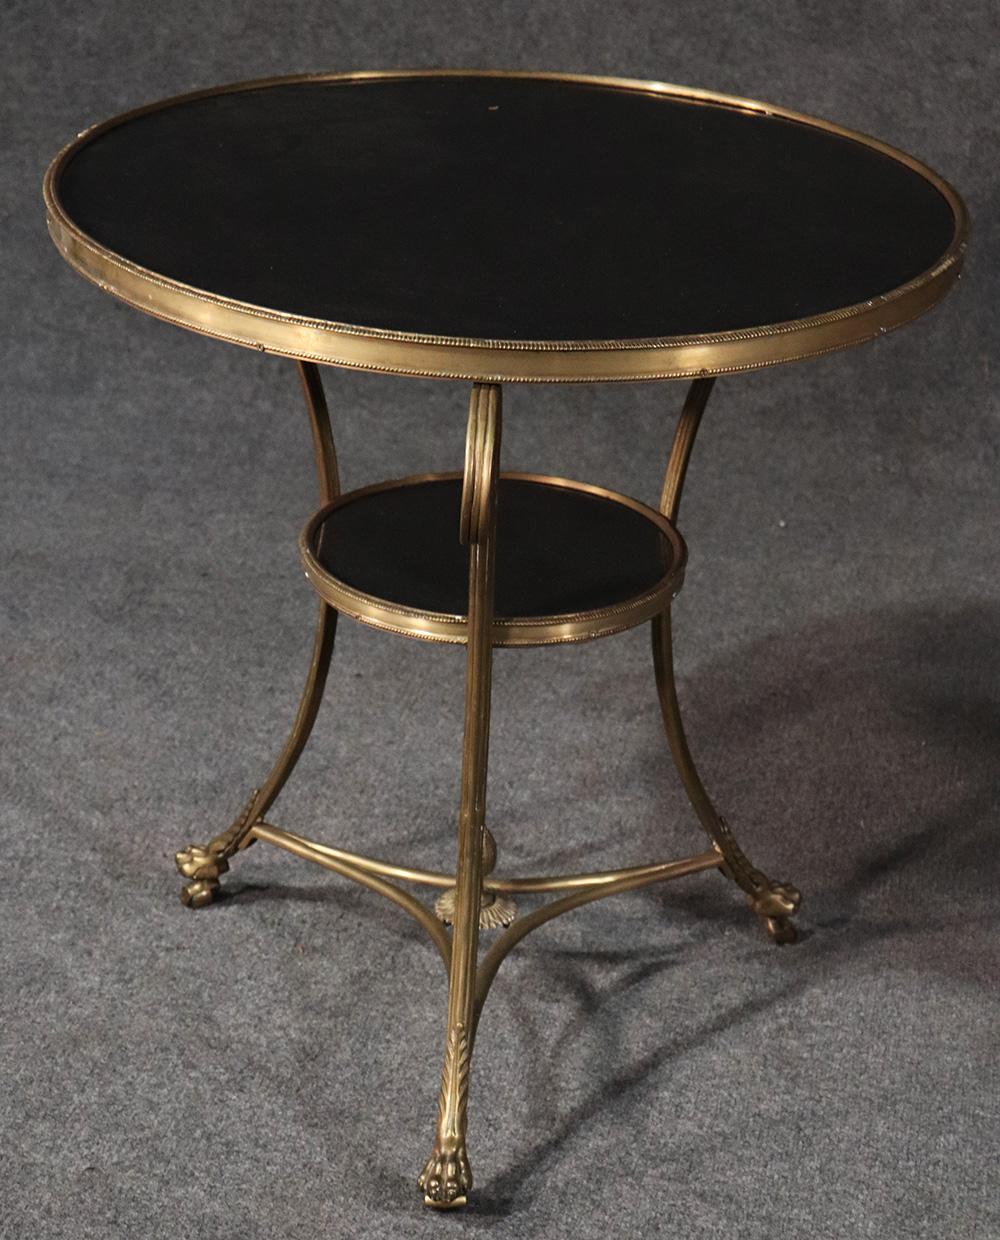 These are exceptional! This wonderful pair of tables is made of the finest quality and heaviest possible bronze possible with beautiful casting quality and detail. The paw feet and deep black marble tops are in flawless condition and so clearly the